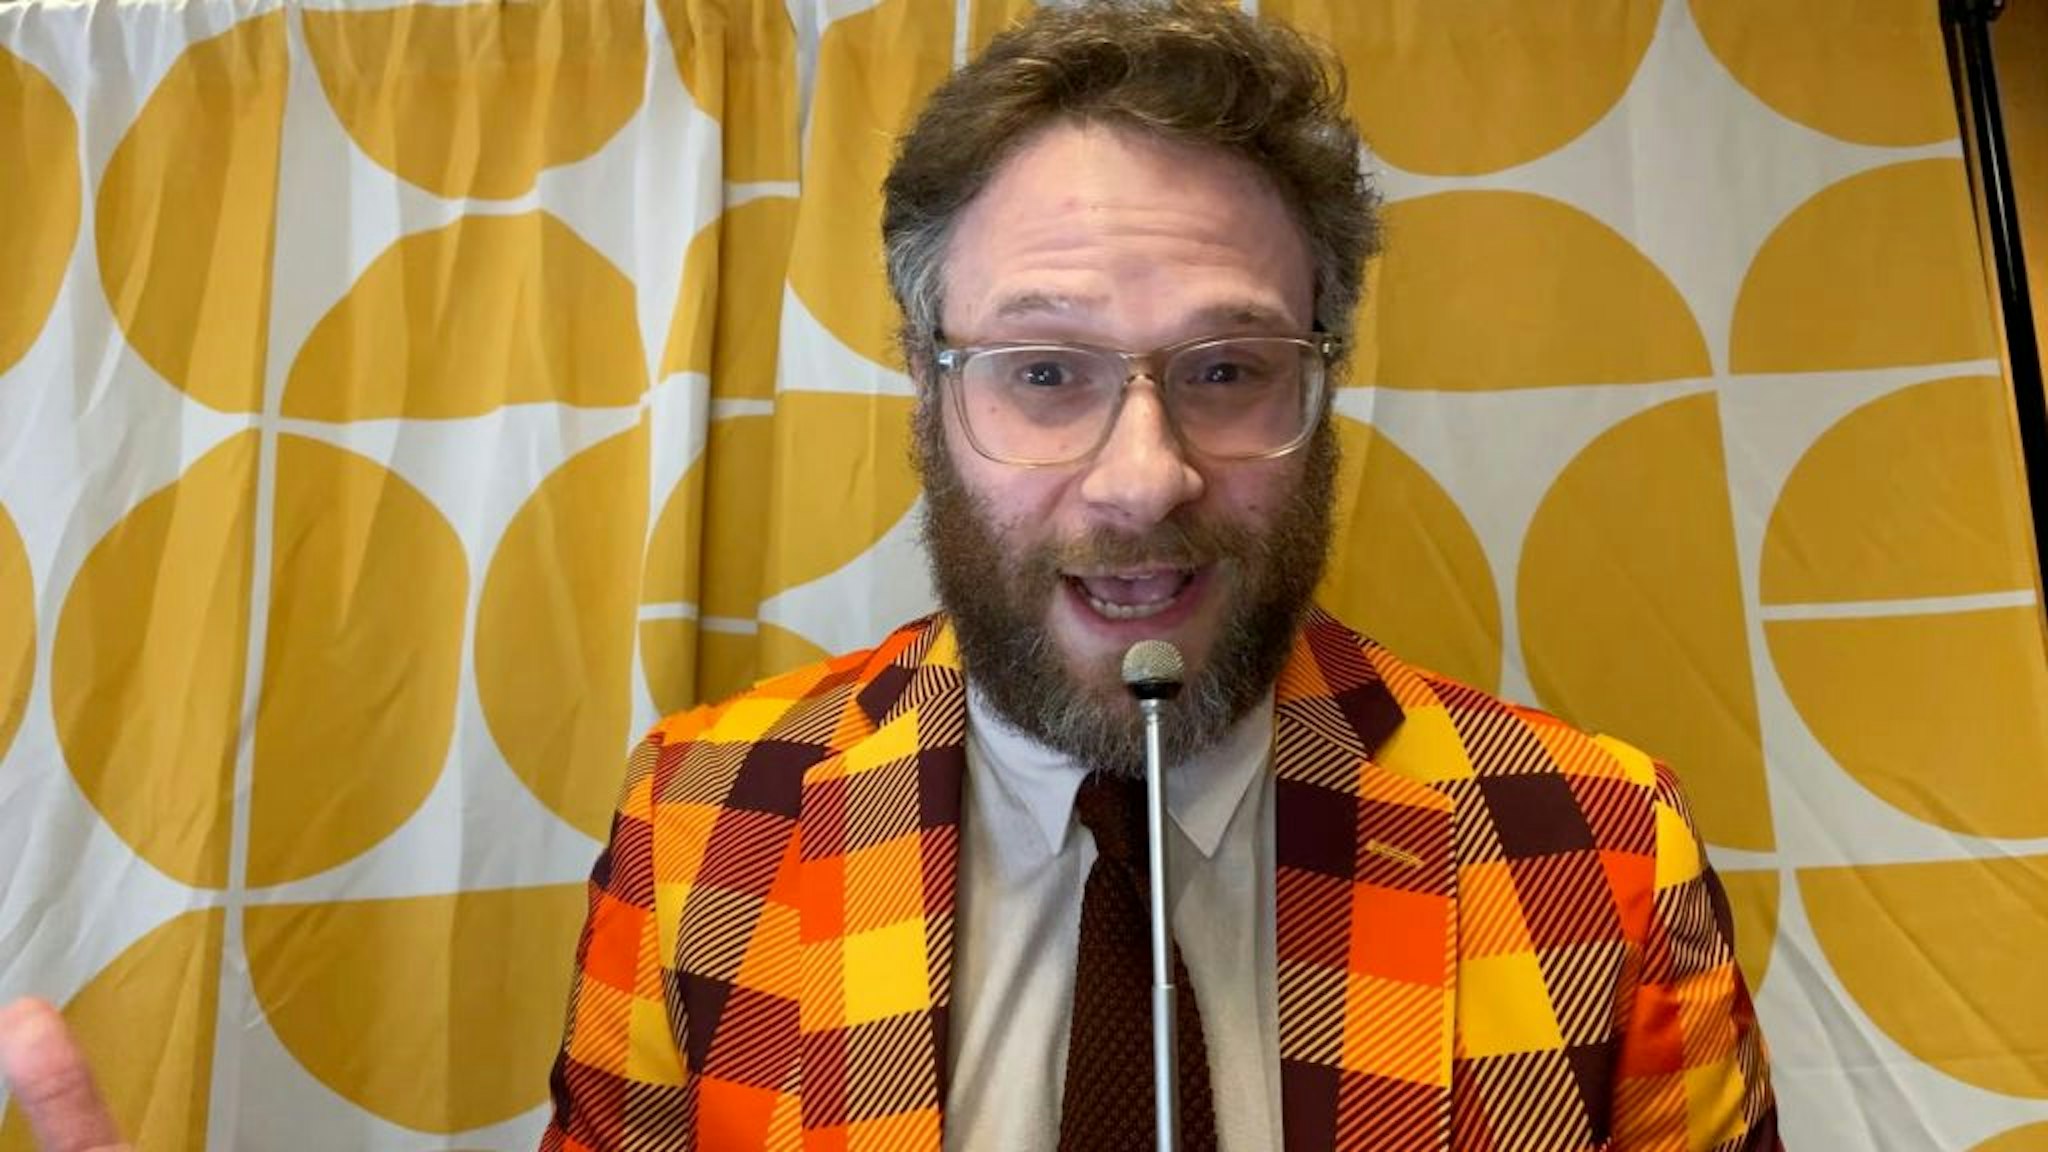 UNSPECIFIED - OCTOBER 21: In this screengrab, host and HFC founder Seth Rogen speaks during Hilarity For Charity's Head To Head Virtual Game Night, hosted by Seth Rogen, presented by Biogen, on October 21, 2020. Hilarity For Charity's Head To Head Virtual Game Night is a 70s-themed fundraiser benefitting Alzheimer’s awareness. (Photo by Getty Images/Getty Images for Hilarity for Charity)